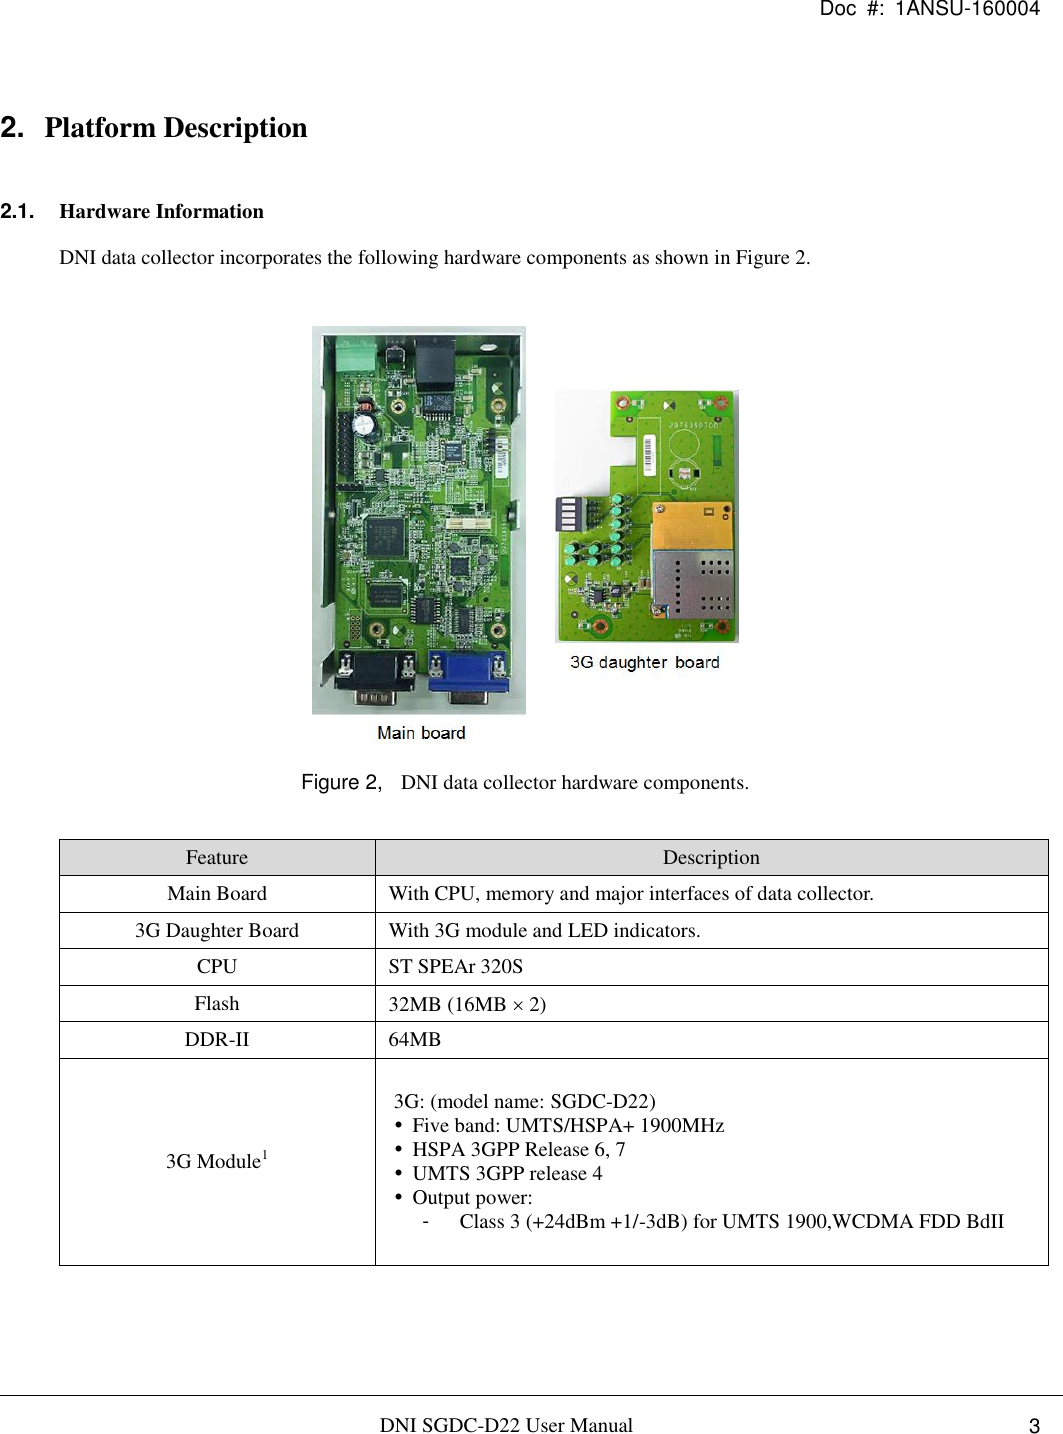 Doc  #:  1ANSU-160004   DNI SGDC-D22 User Manual i.  3 2. Platform Description 2.1. Hardware Information DNI data collector incorporates the following hardware components as shown in Figure 2.   Figure 2,  DNI data collector hardware components.  Feature Description Main Board With CPU, memory and major interfaces of data collector. 3G Daughter Board With 3G module and LED indicators. CPU ST SPEAr 320S   Flash 32MB (16MB  2) DDR-II 64MB 3G Module1 3G: (model name: SGDC-D22)  Five band: UMTS/HSPA+ 1900MHz  HSPA 3GPP Release 6, 7  UMTS 3GPP release 4  Output power: -  Class 3 (+24dBm +1/-3dB) for UMTS 1900,WCDMA FDD BdII    